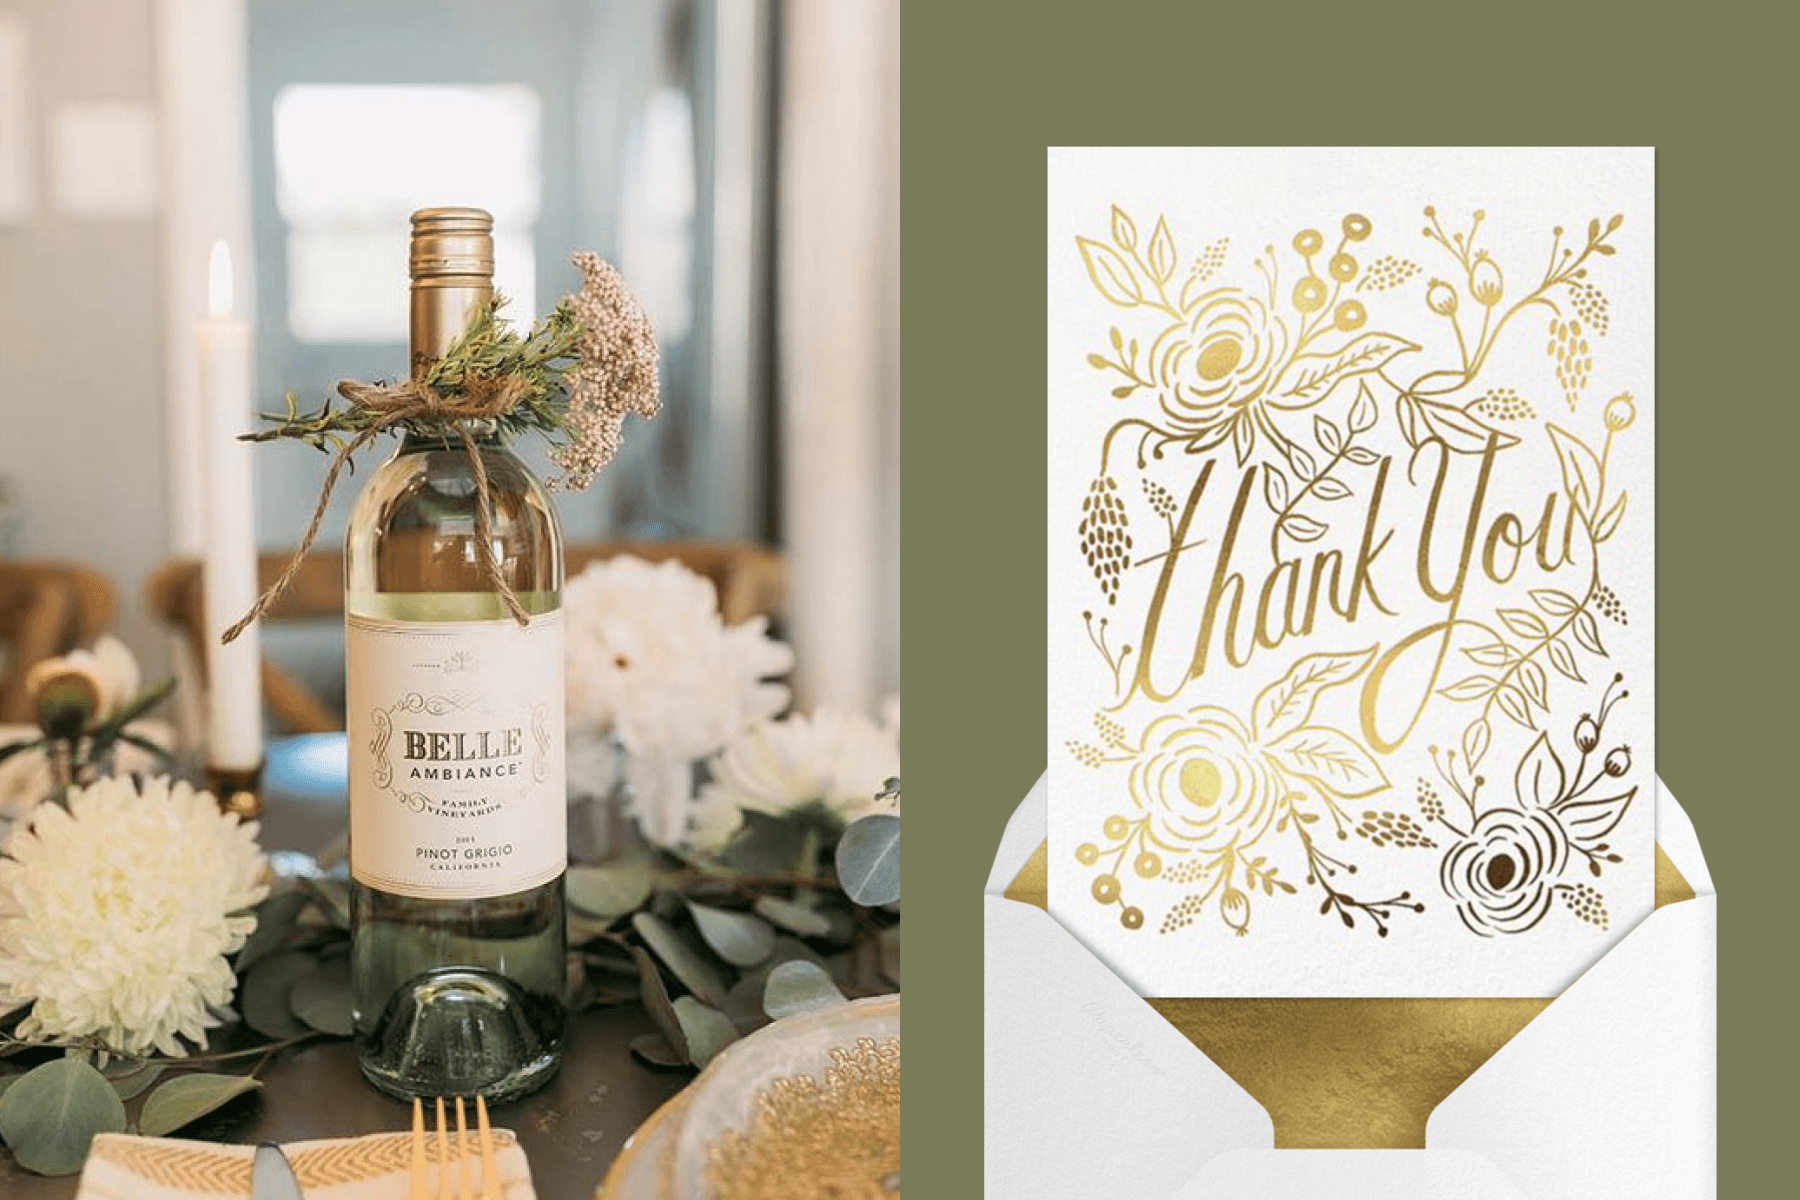 Left: A bottle of white wine on a set table with a sprig of flowers tied to it; right: A white thank you note with gold flora designs.